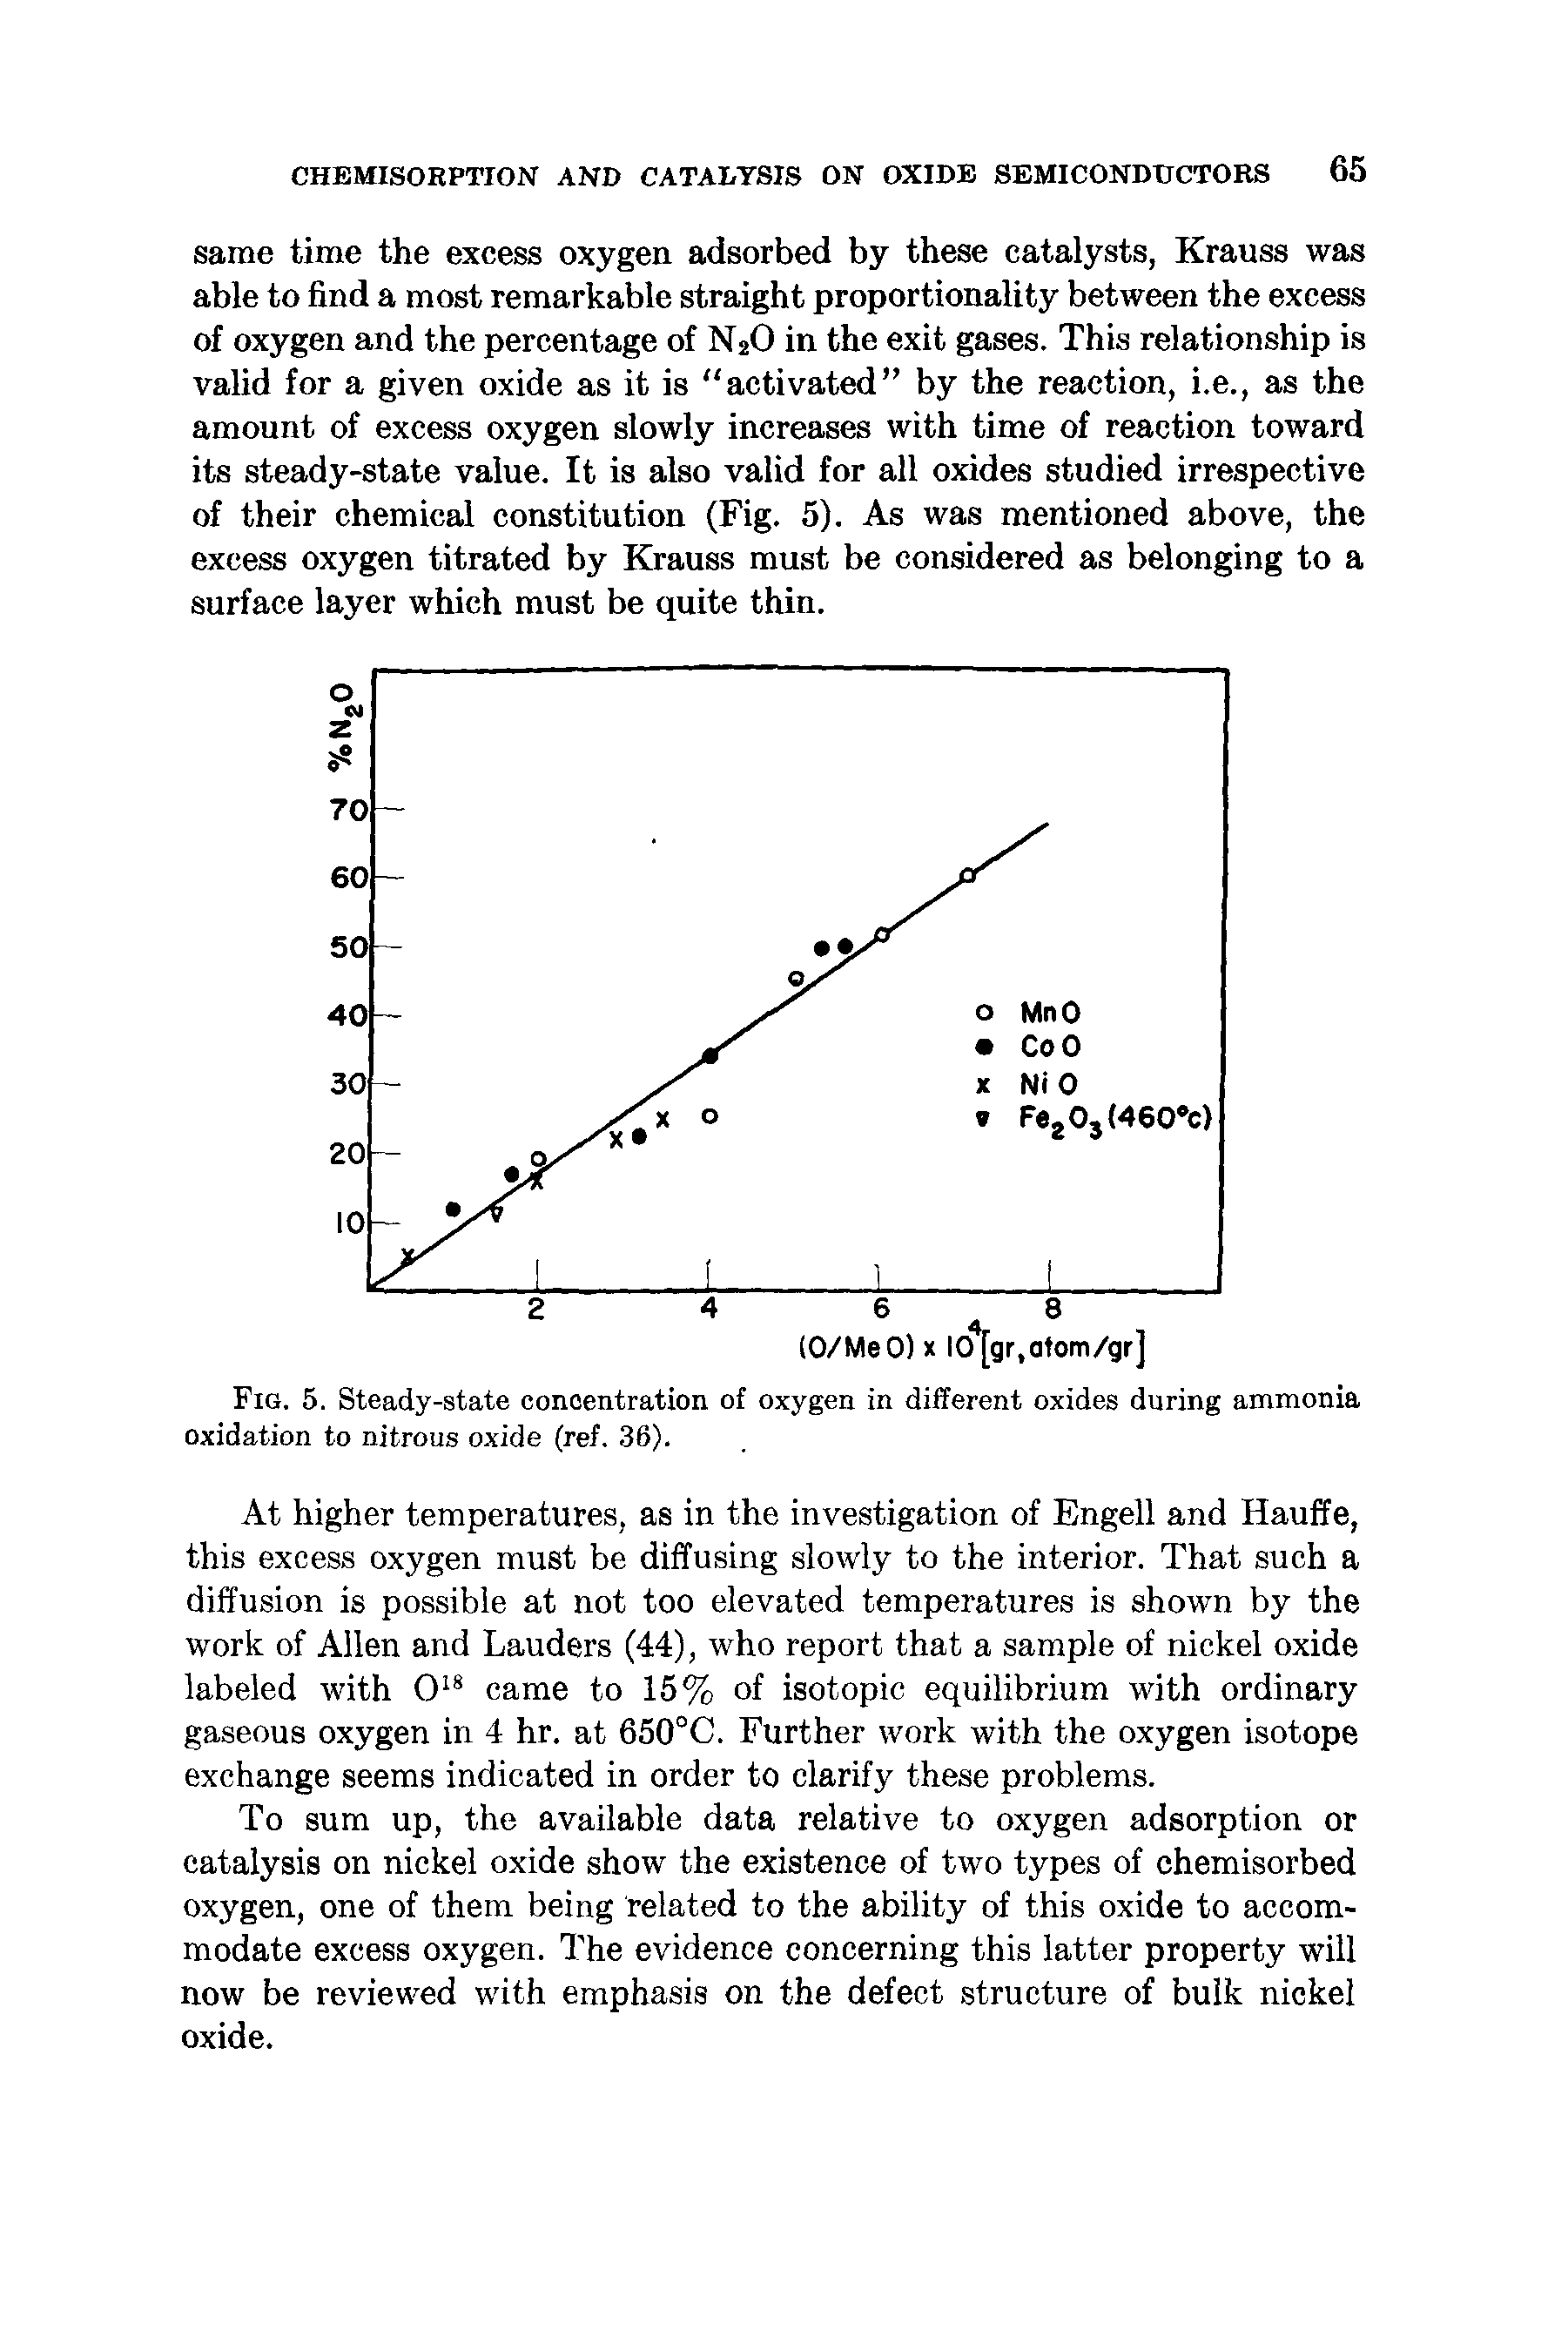 Fig. 5. Steady-state concentration of oxygen in different oxides during ammonia oxidation to nitrous oxide (ref. 36).